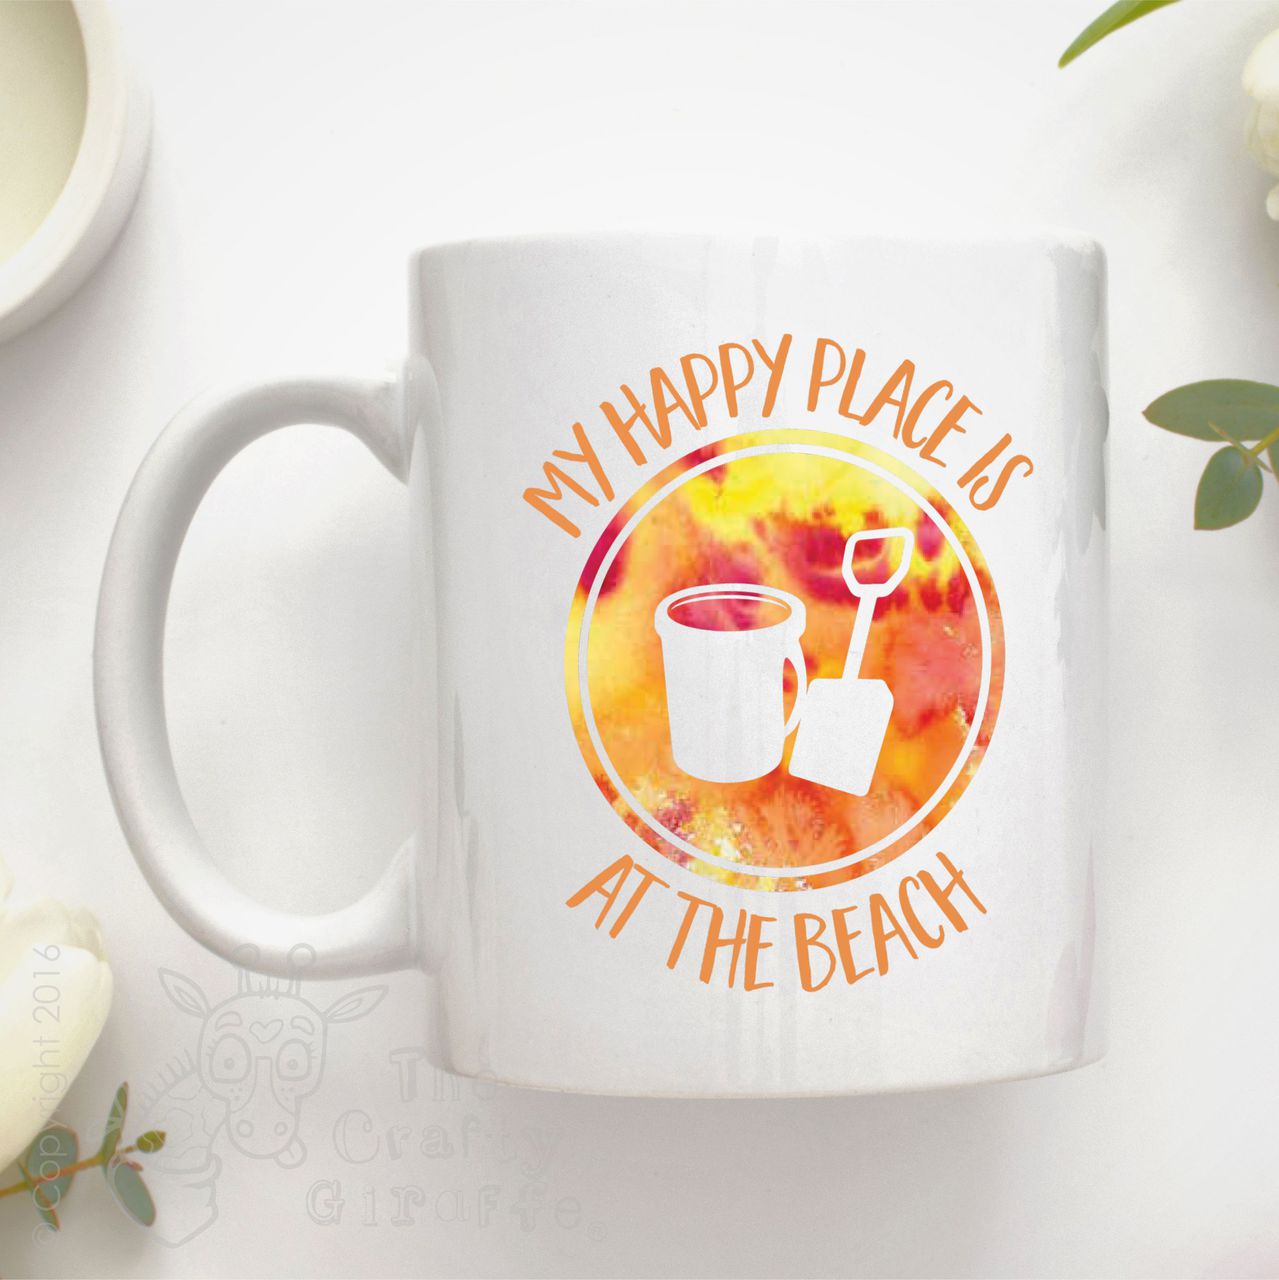 My happy place is “at the beach” Mug